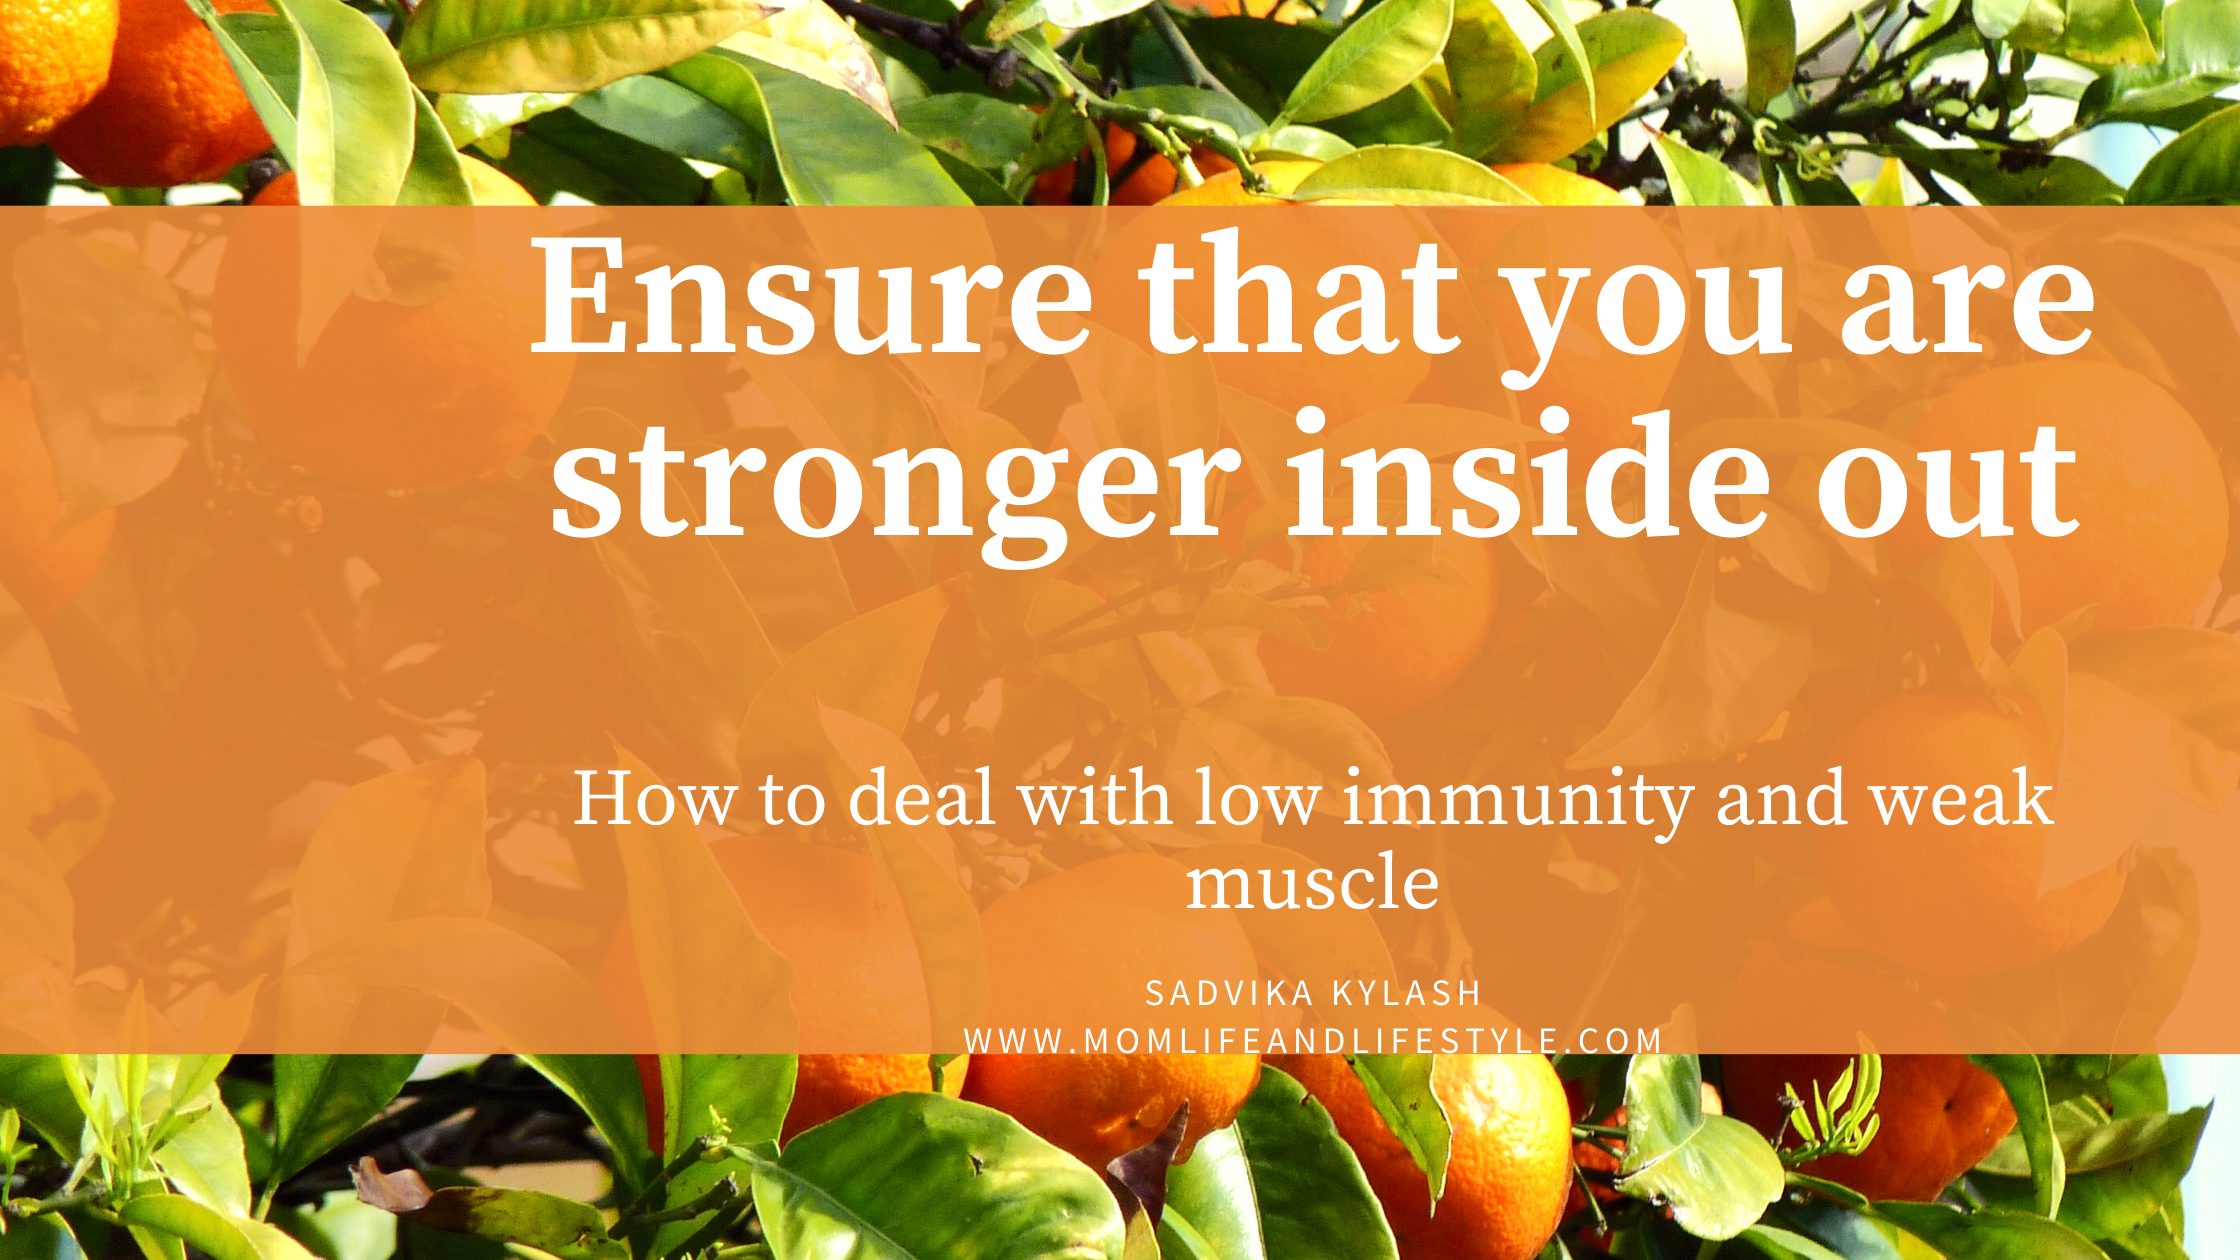 Ensure that you are stronger inside out(immunity weak muscles)